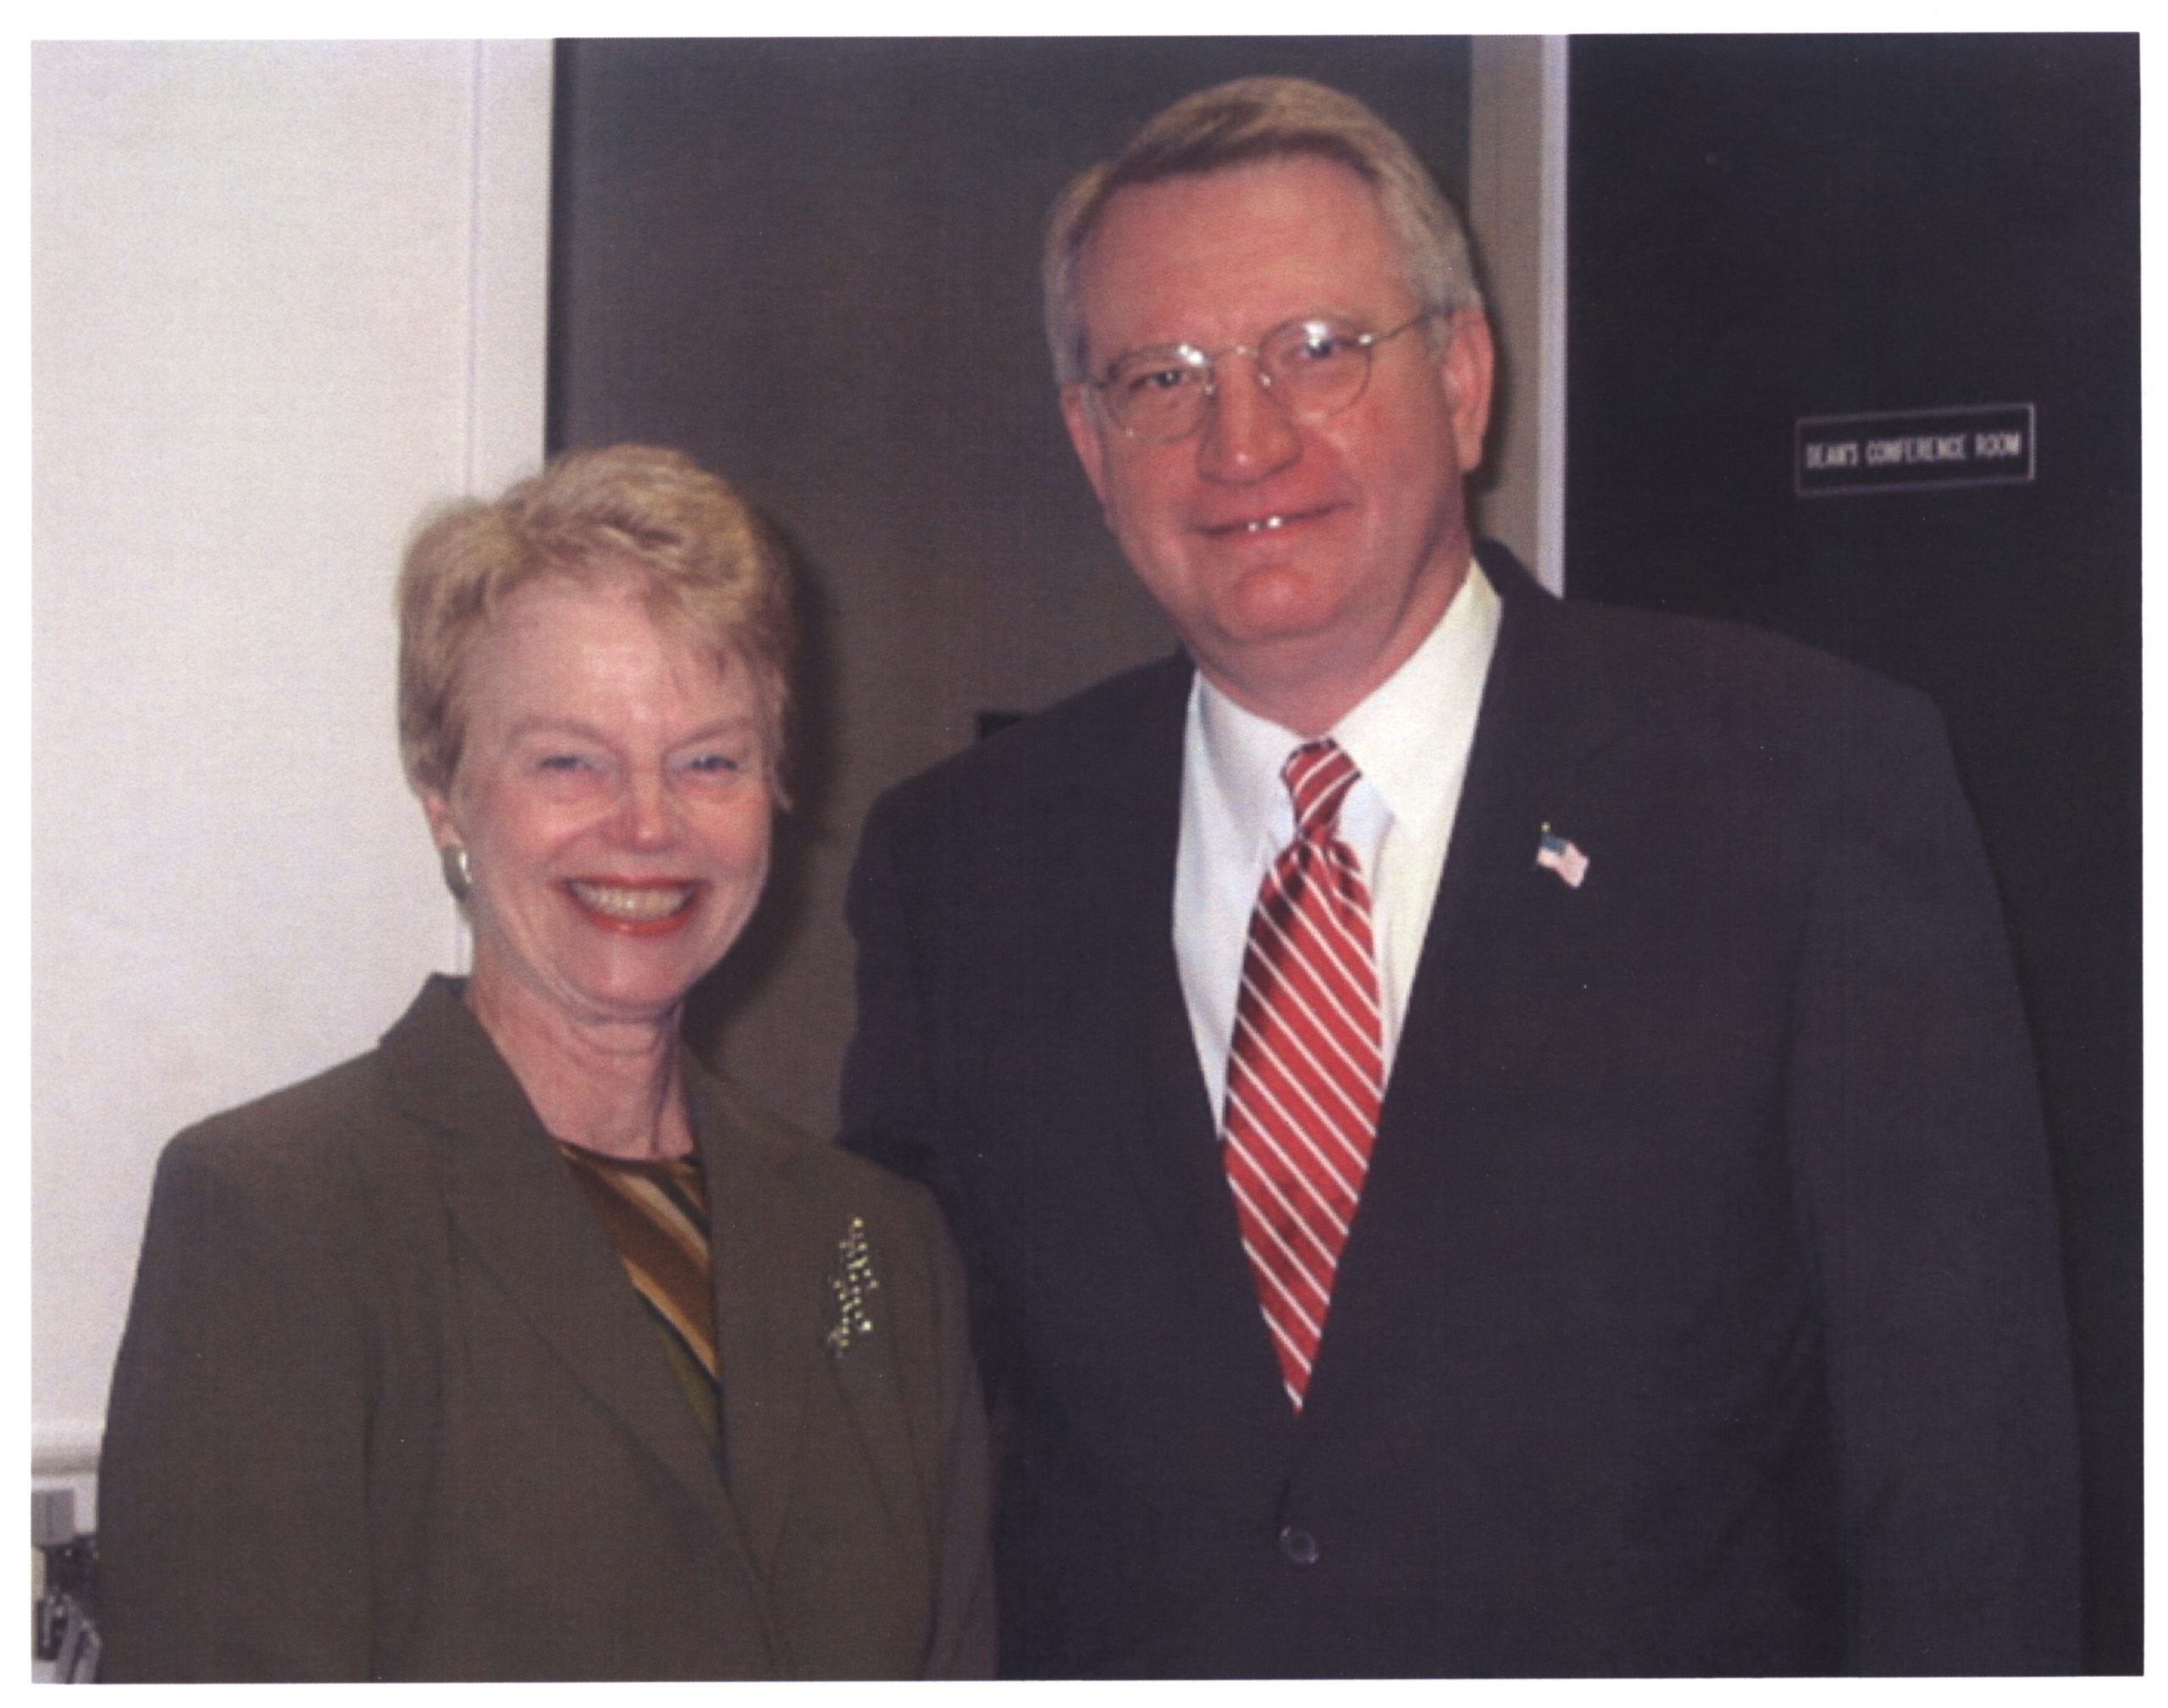 Dr. Marcus with John P. Walters, Director of the White House Office of National Drug Control Policy (ONDCP) in the George W. Bush administration, undated. MS 174 Marianne Marcus, Ed.D papers, box 1, folder 6, McGovern Historical Center